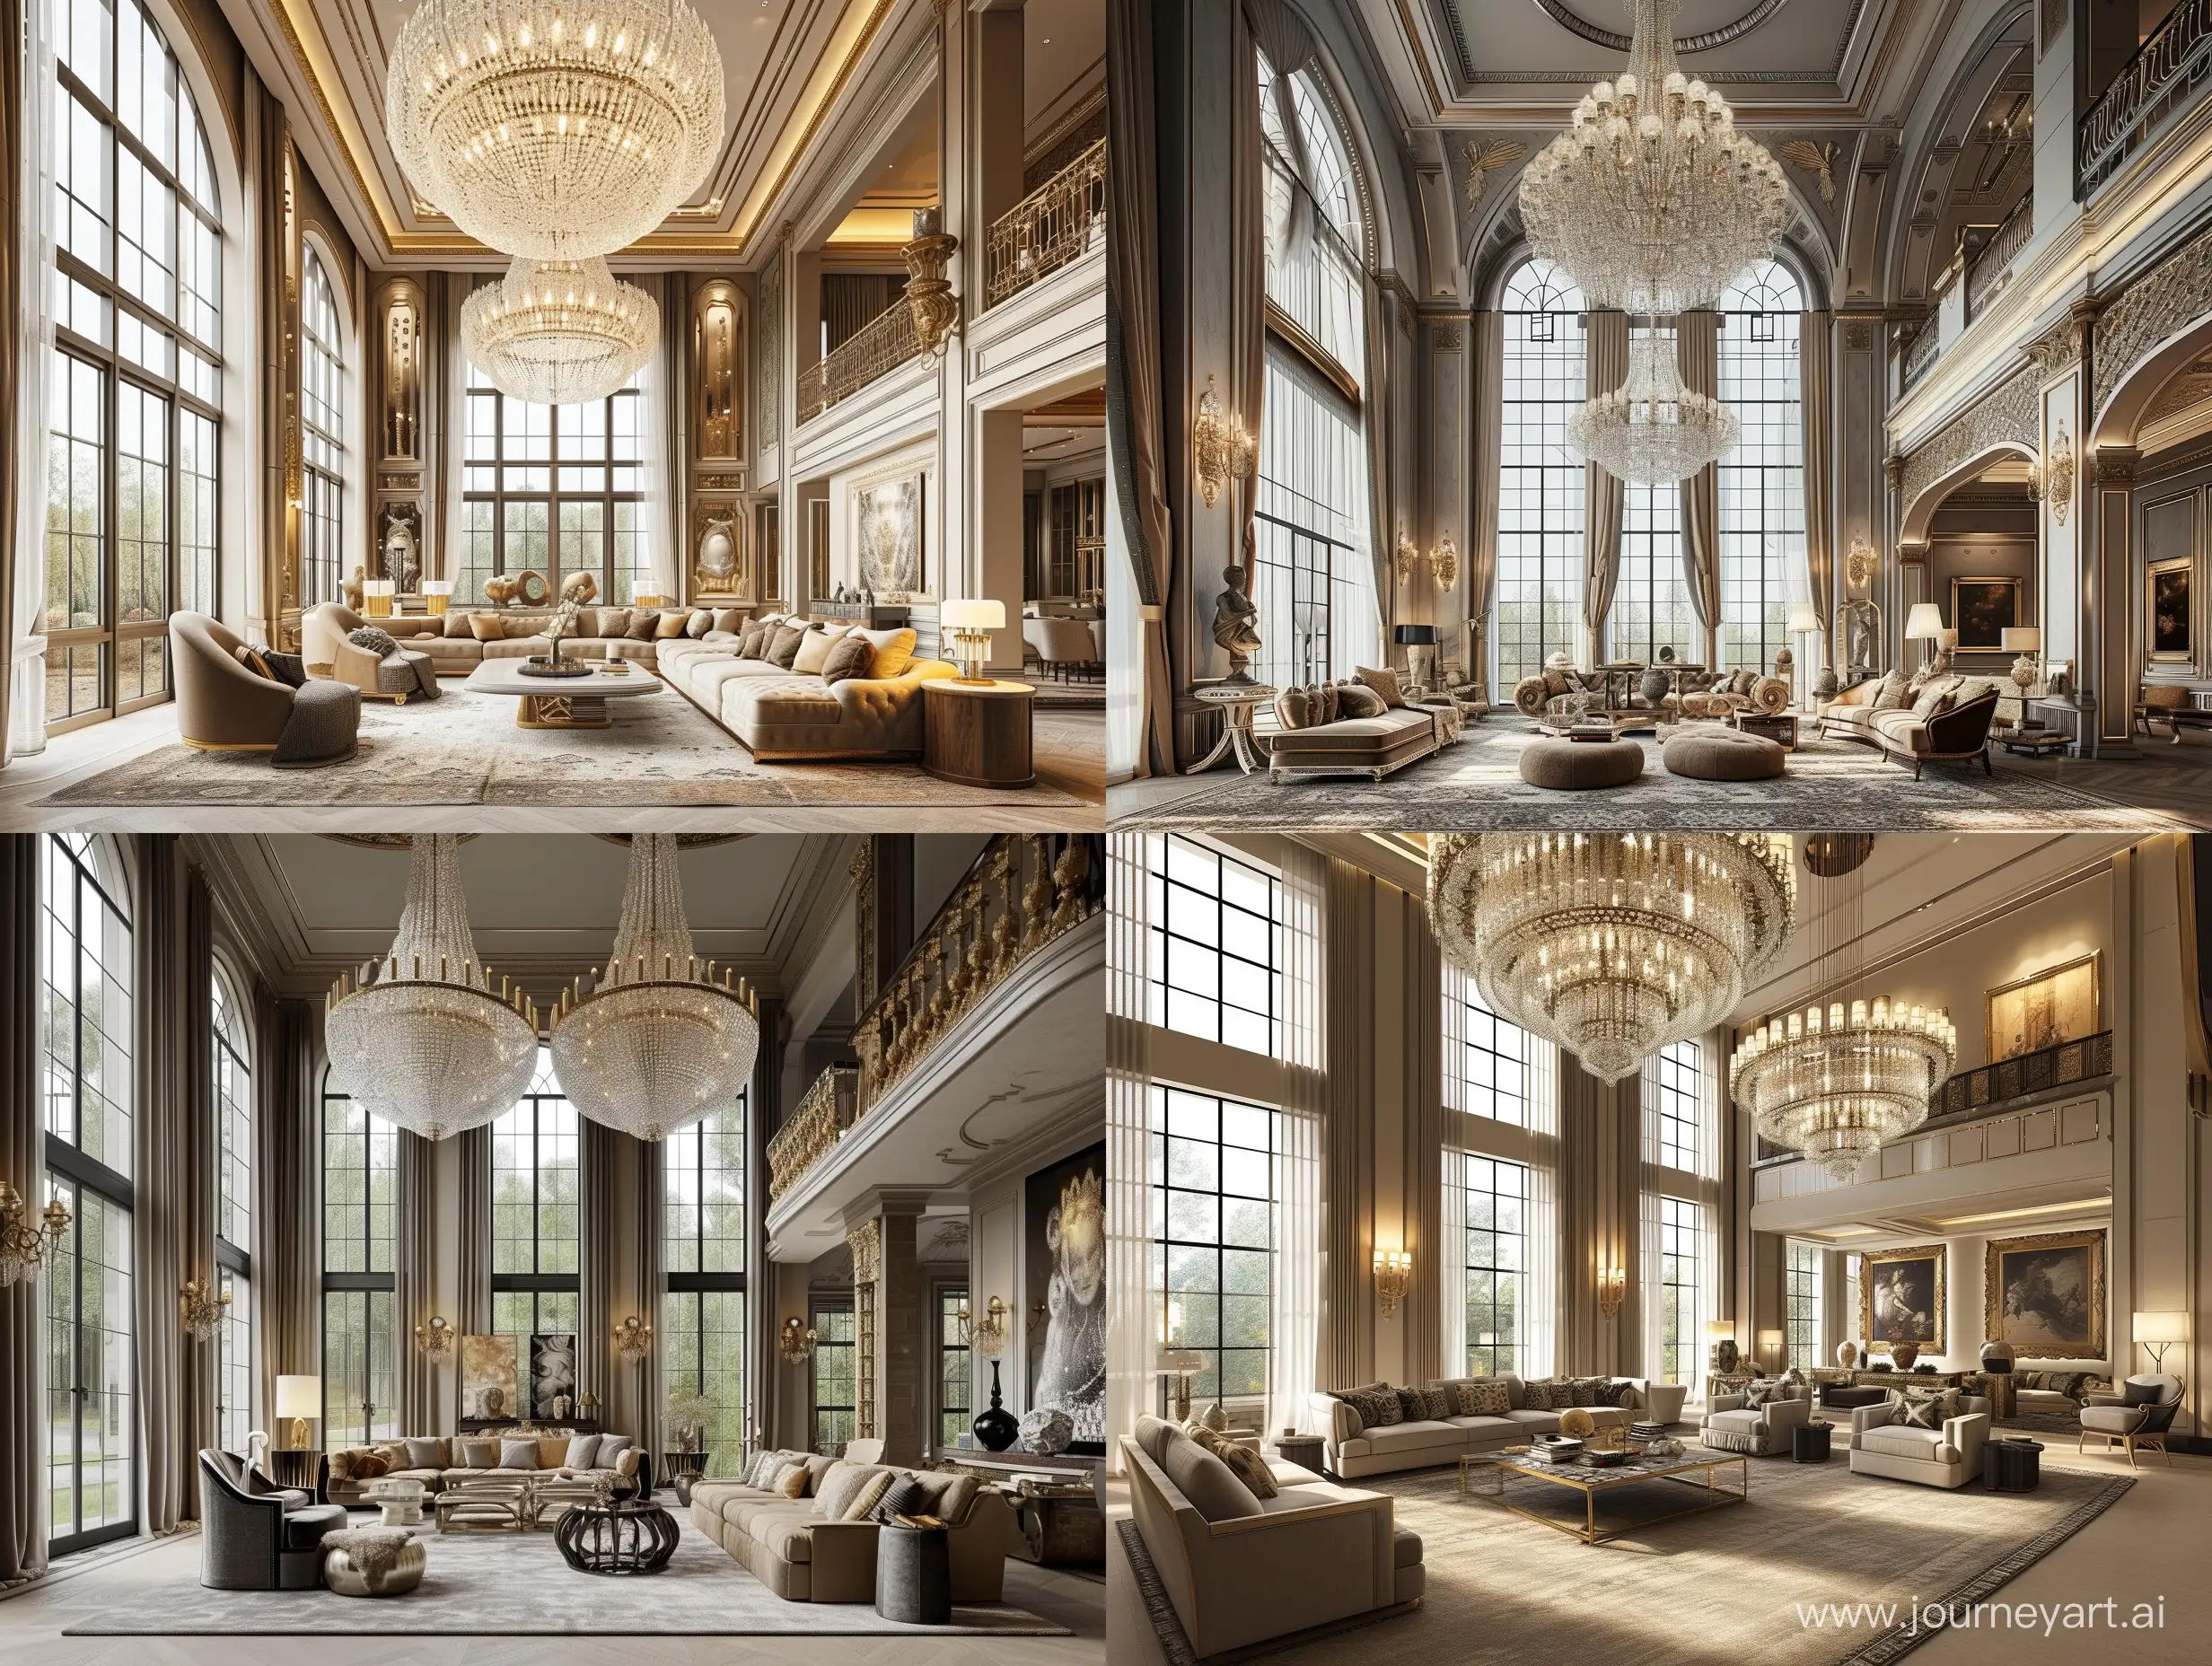 Opulent-Living-Room-with-High-Ceilings-and-Elegant-Decor